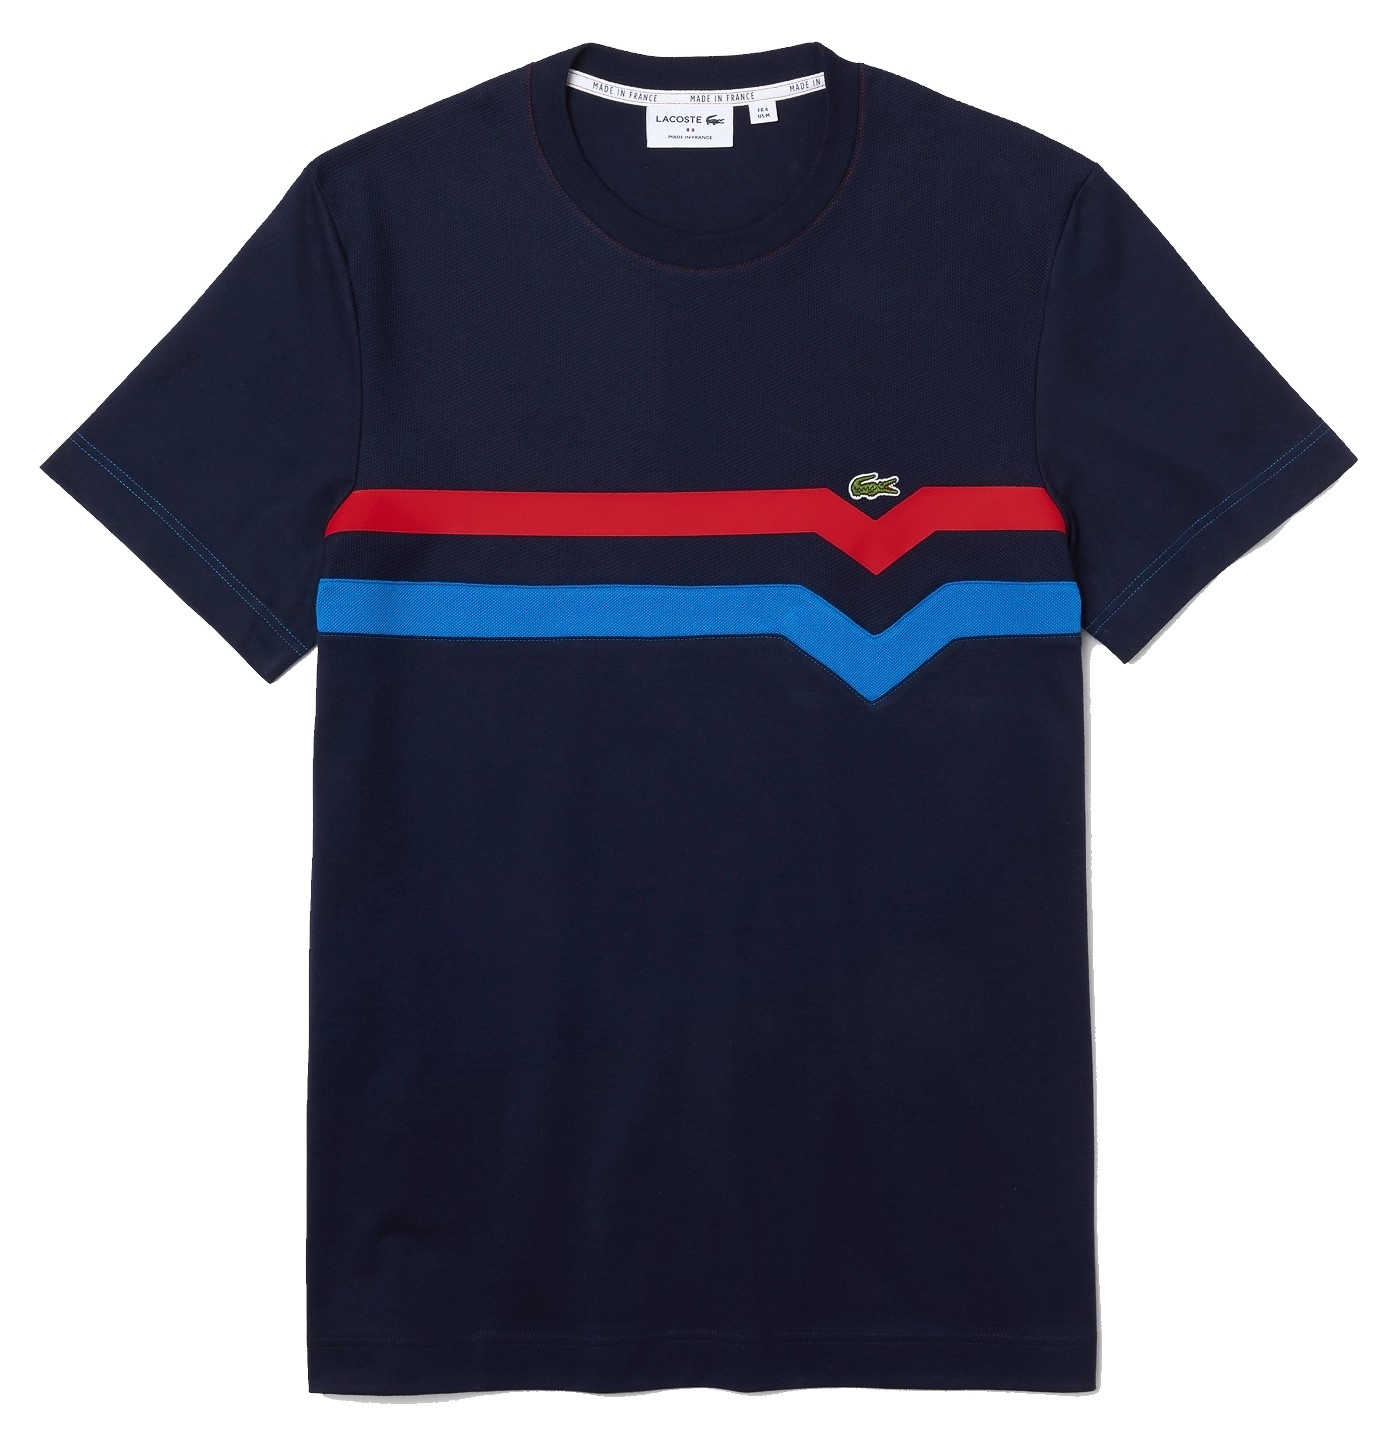 Lacoste "made In France" Striped Organic Cotton Tee Navy Blue